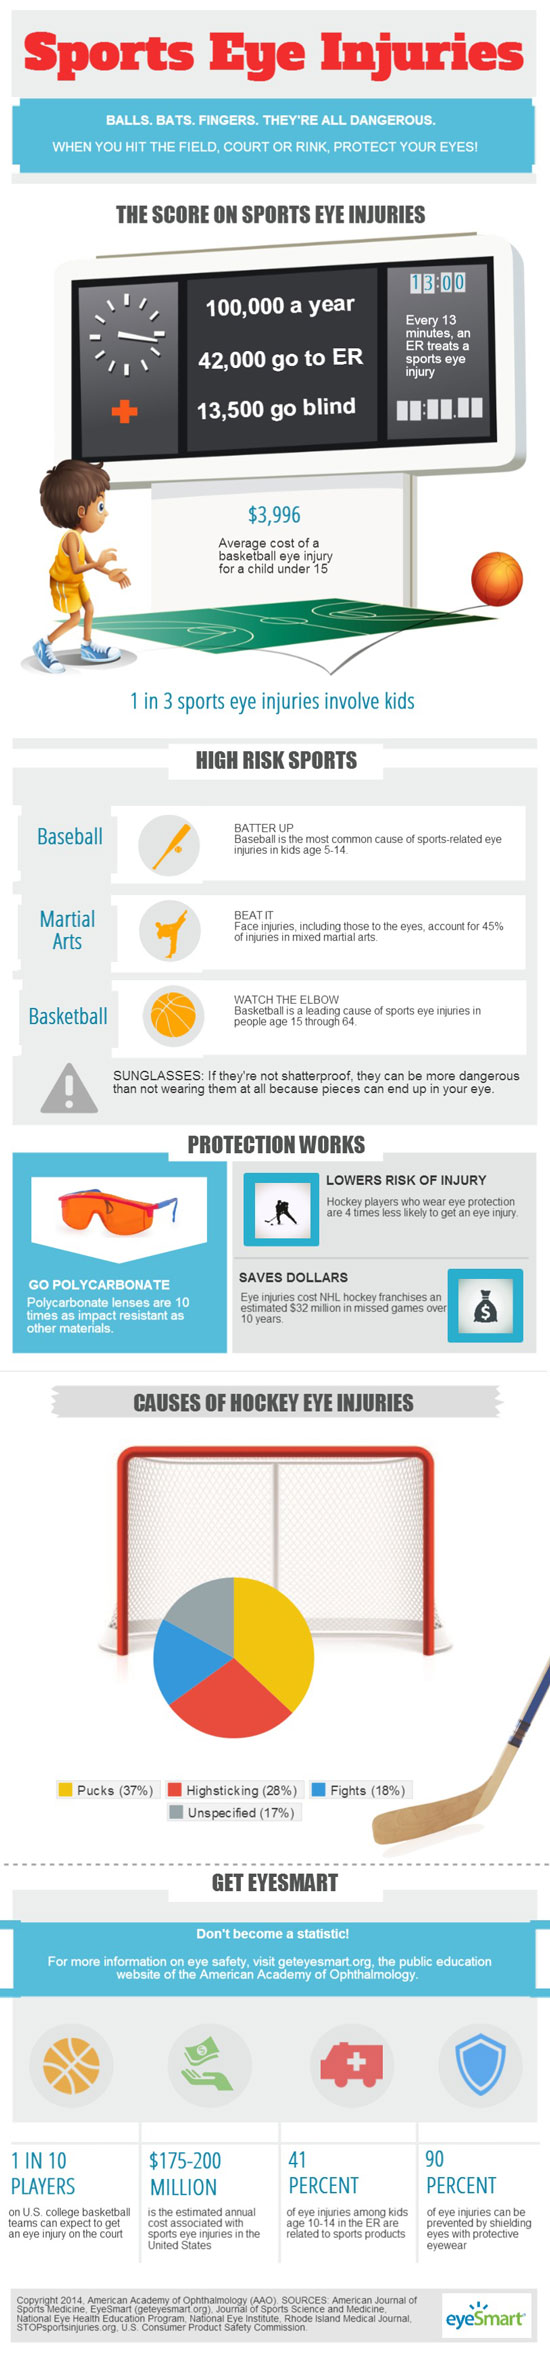 Sports-Eye-Injuries-Infographic-March-2014-550px_1